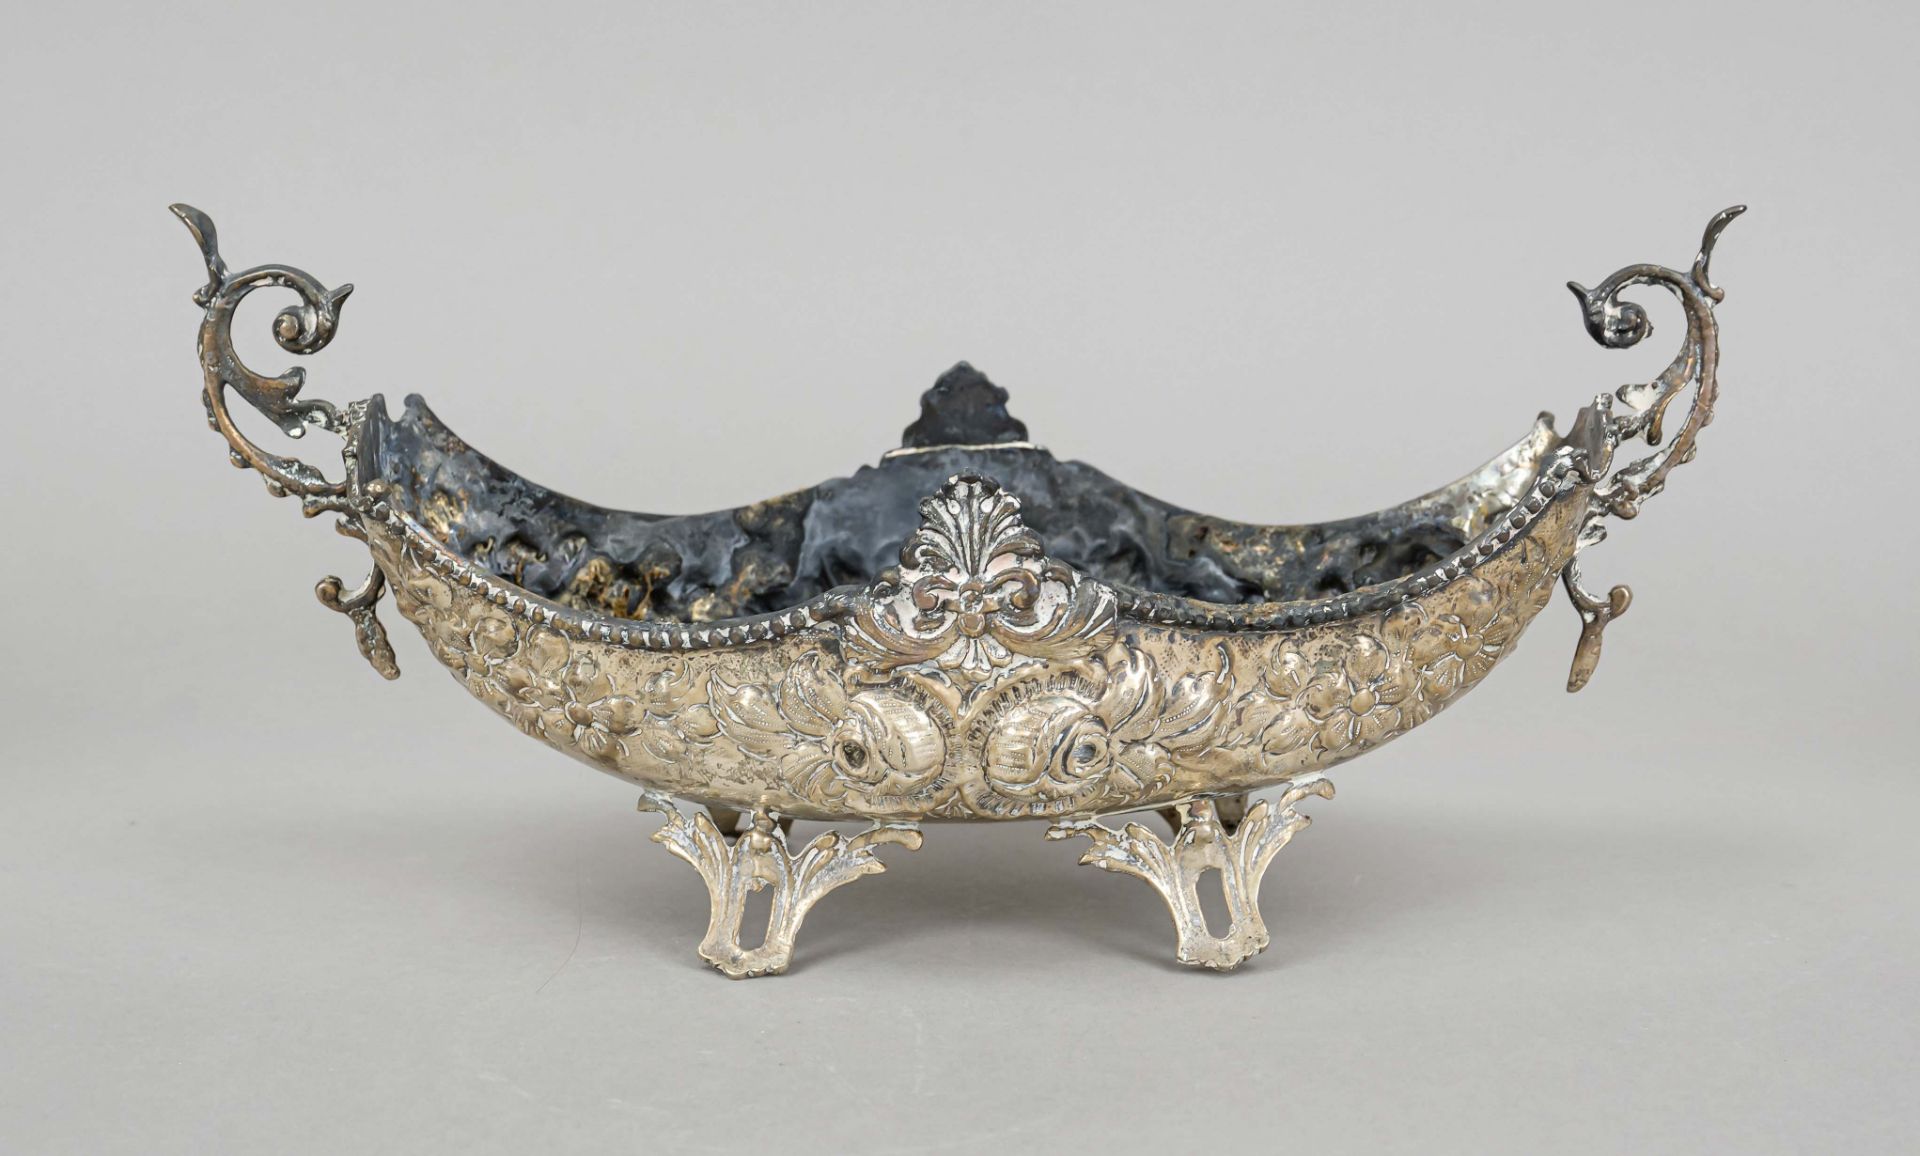 Jardiniere, 20th century, silver 800/000, on 4 feet, boat-shaped body, applied handles to the sides,